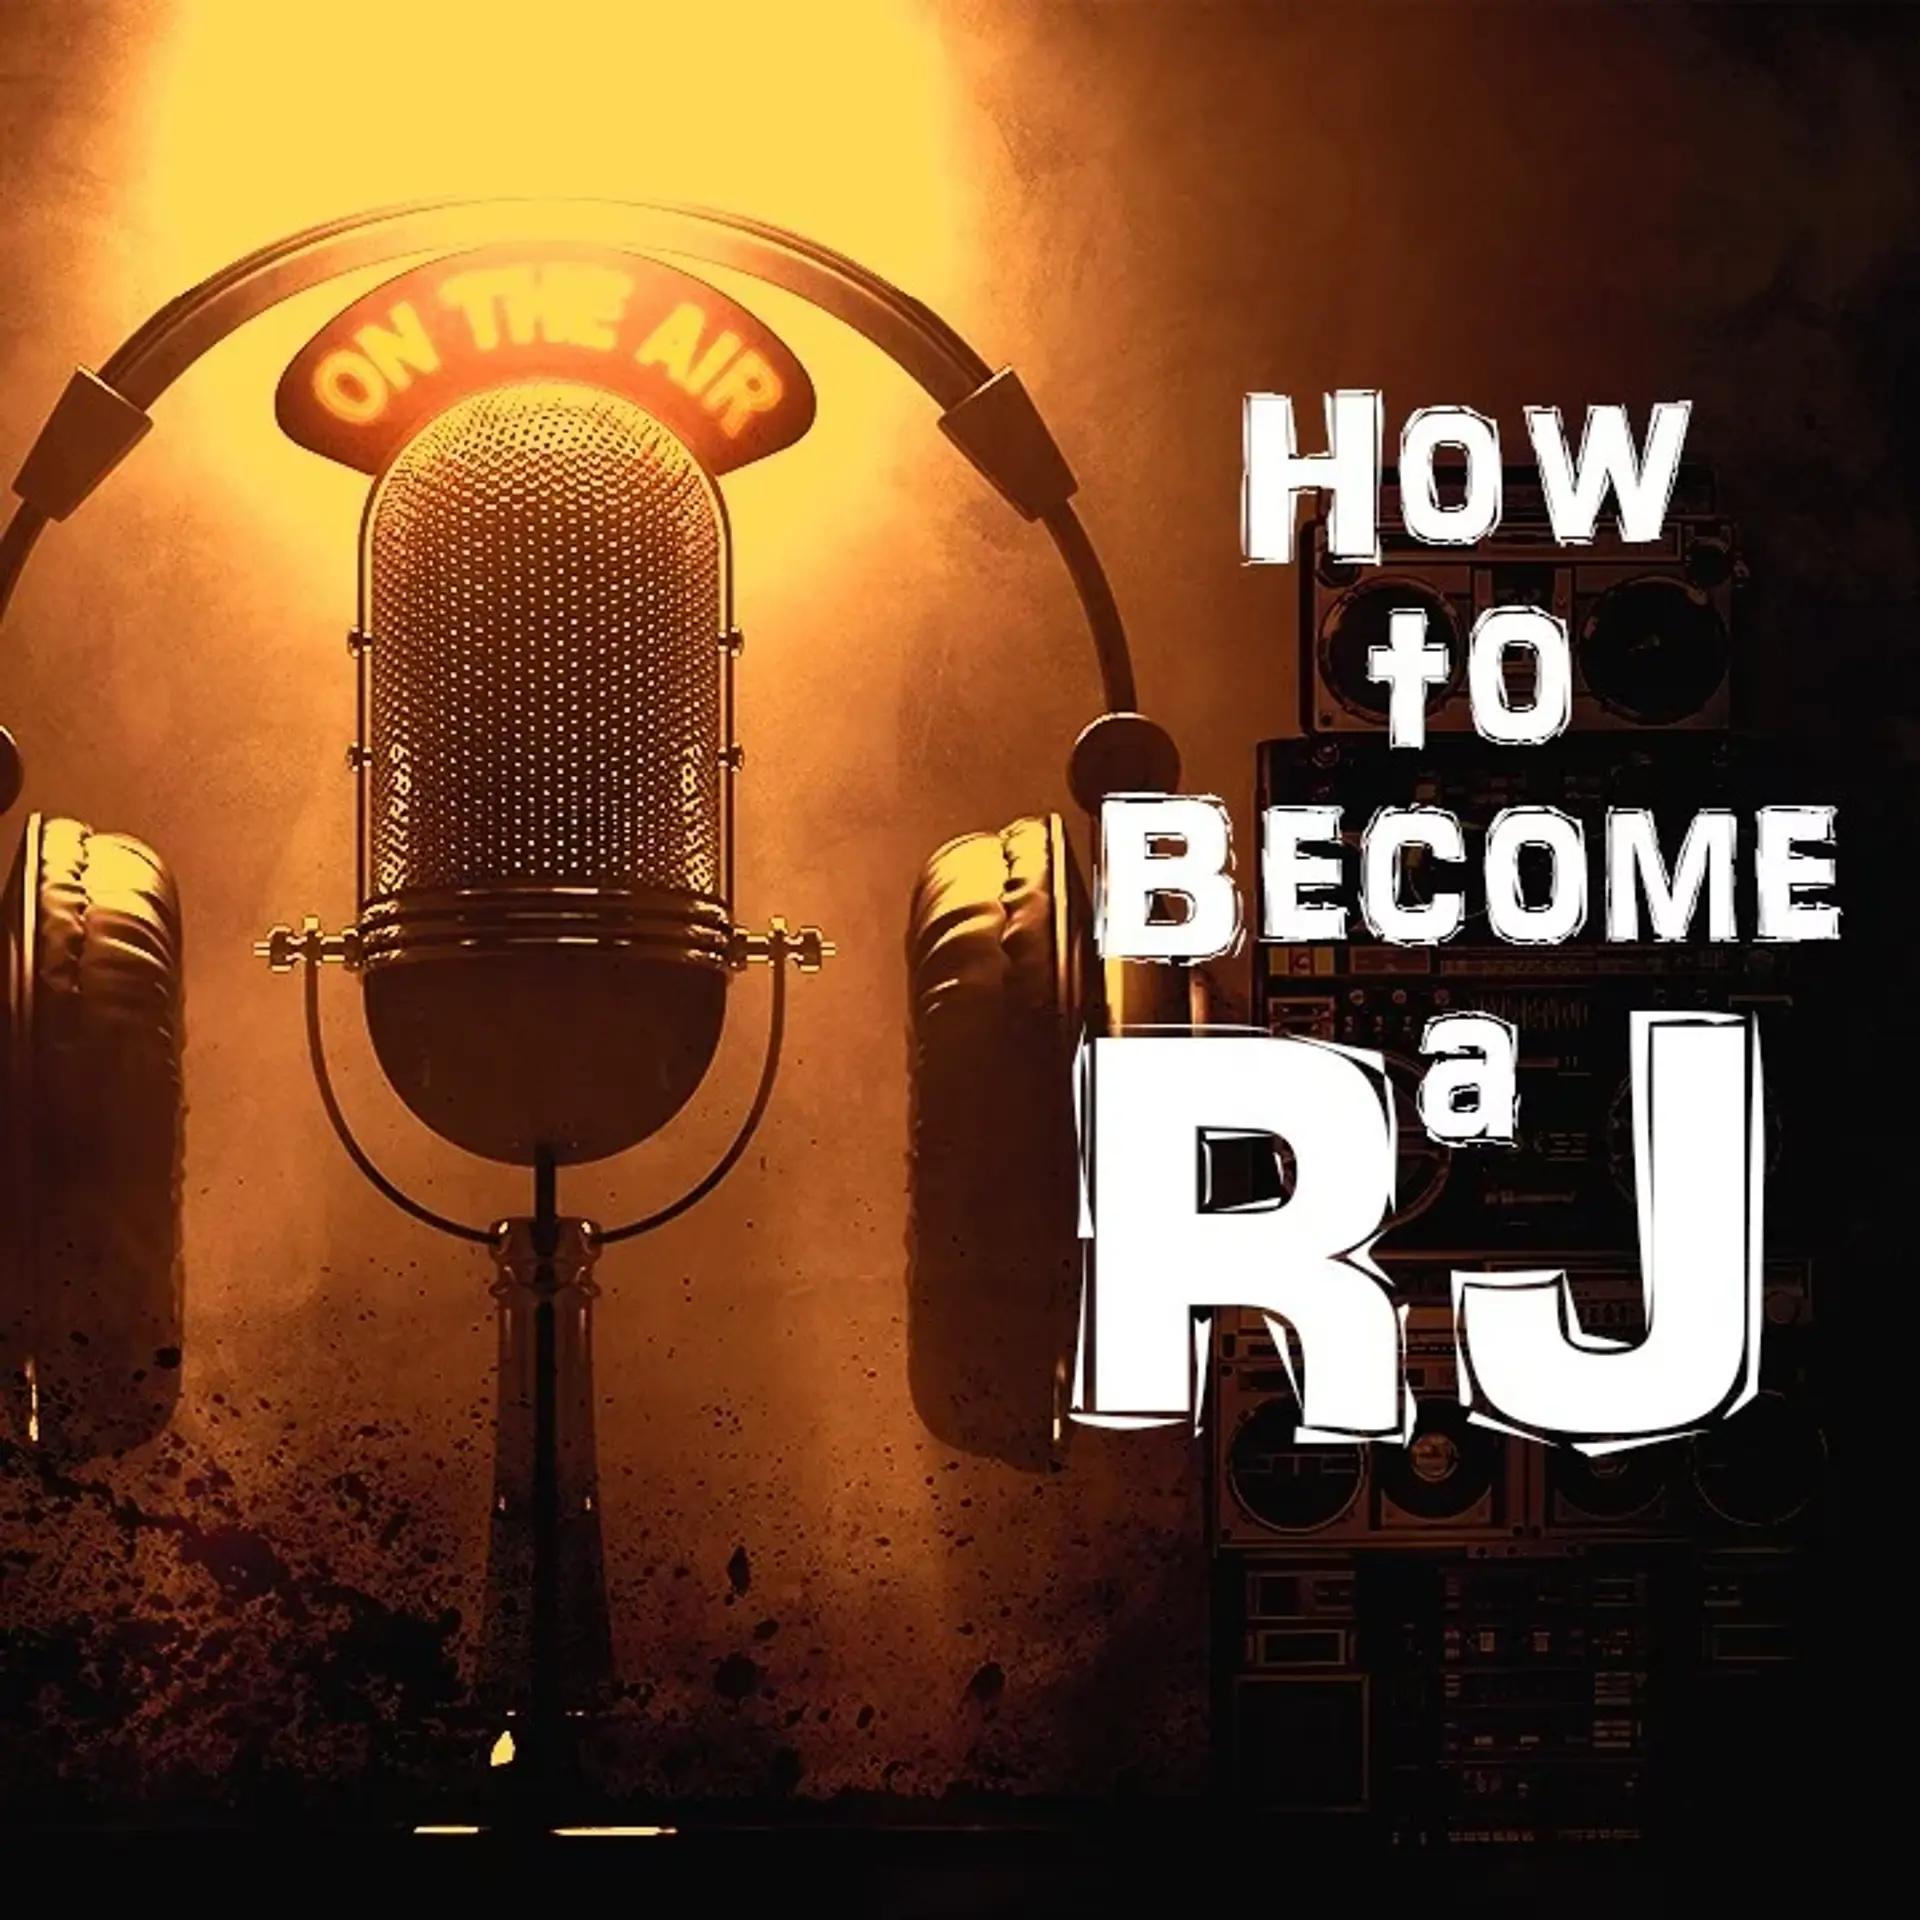 4. Who is a RJ ?